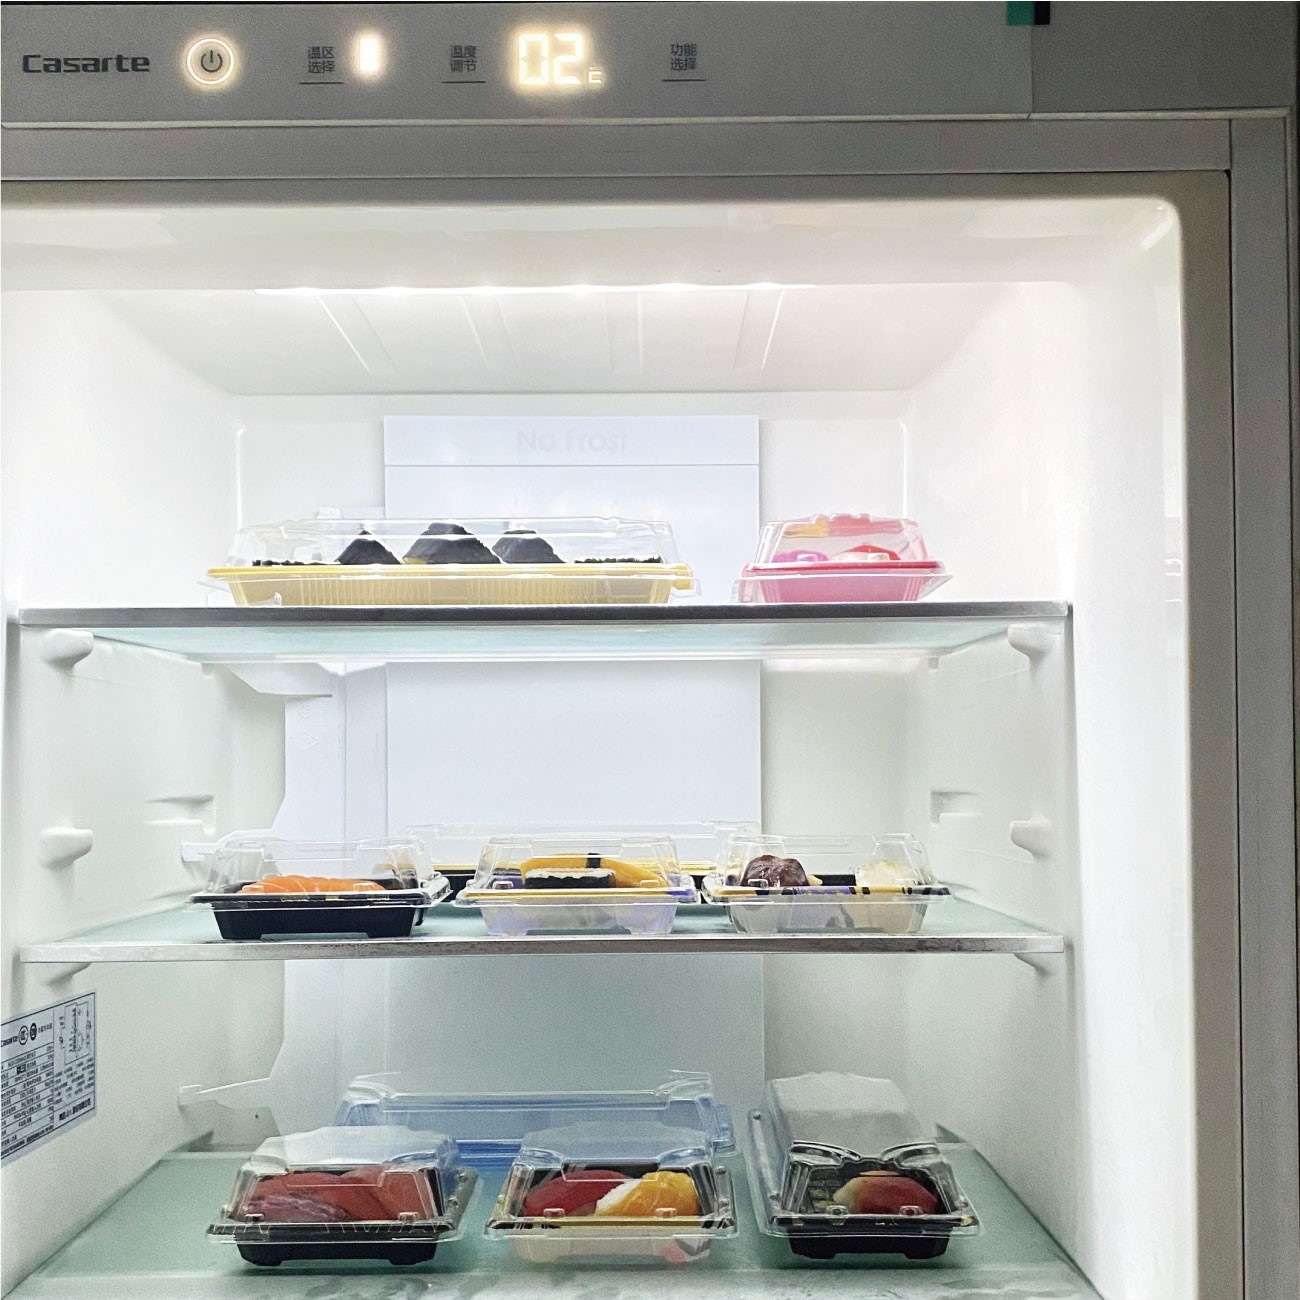 There are some sushi plates WL-01 in the refrigerator, which can be used for refrigeration.